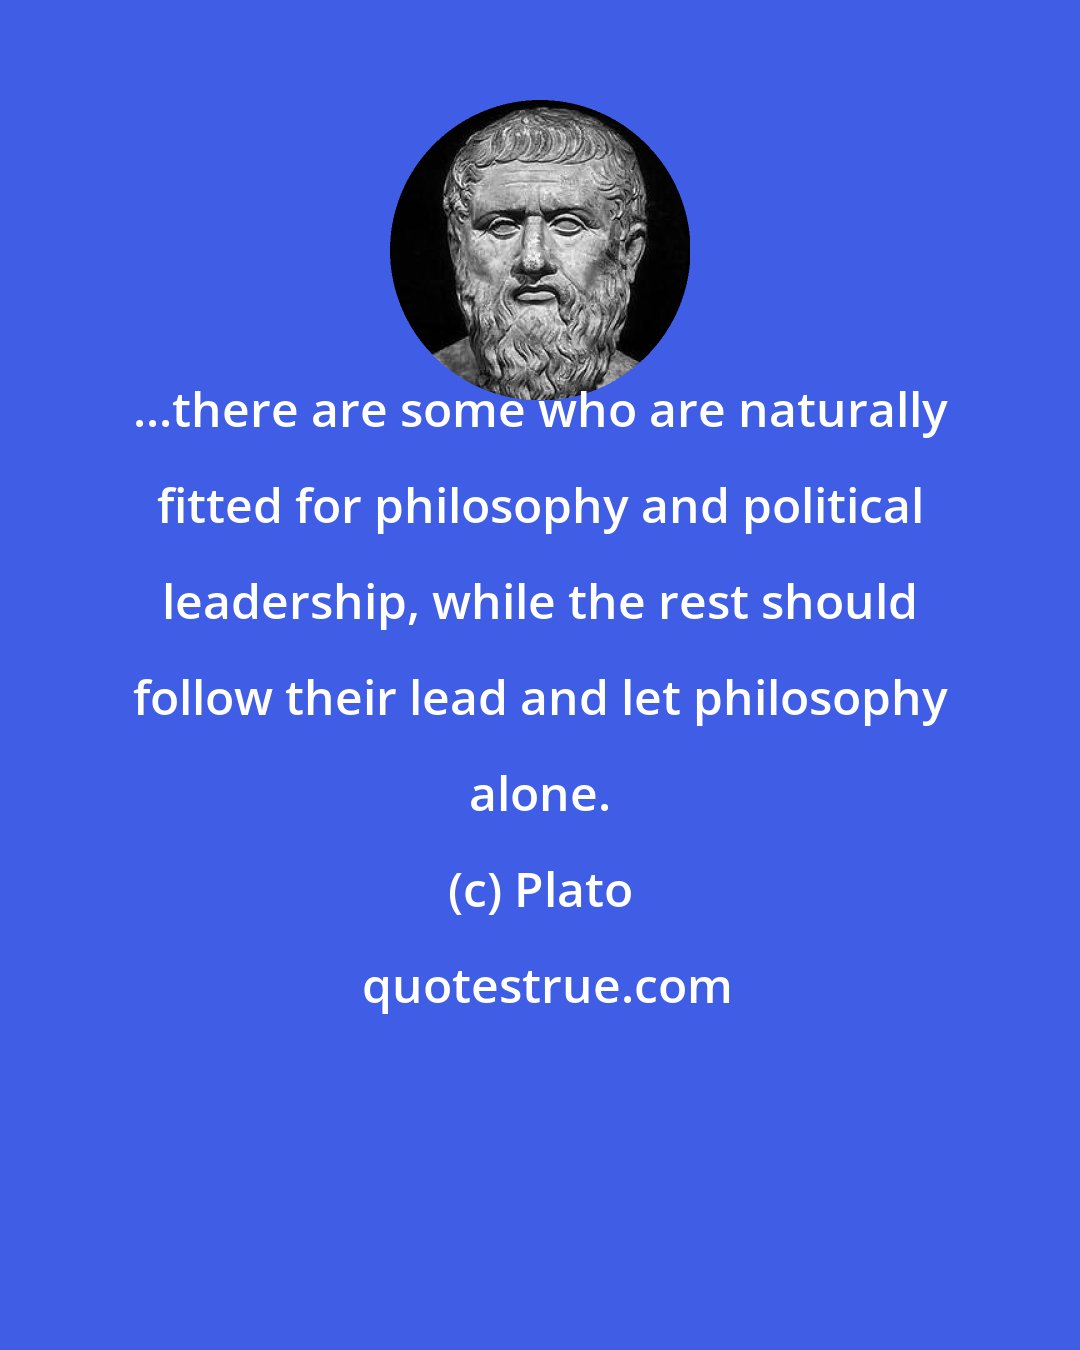 Plato: ...there are some who are naturally fitted for philosophy and political leadership, while the rest should follow their lead and let philosophy alone.